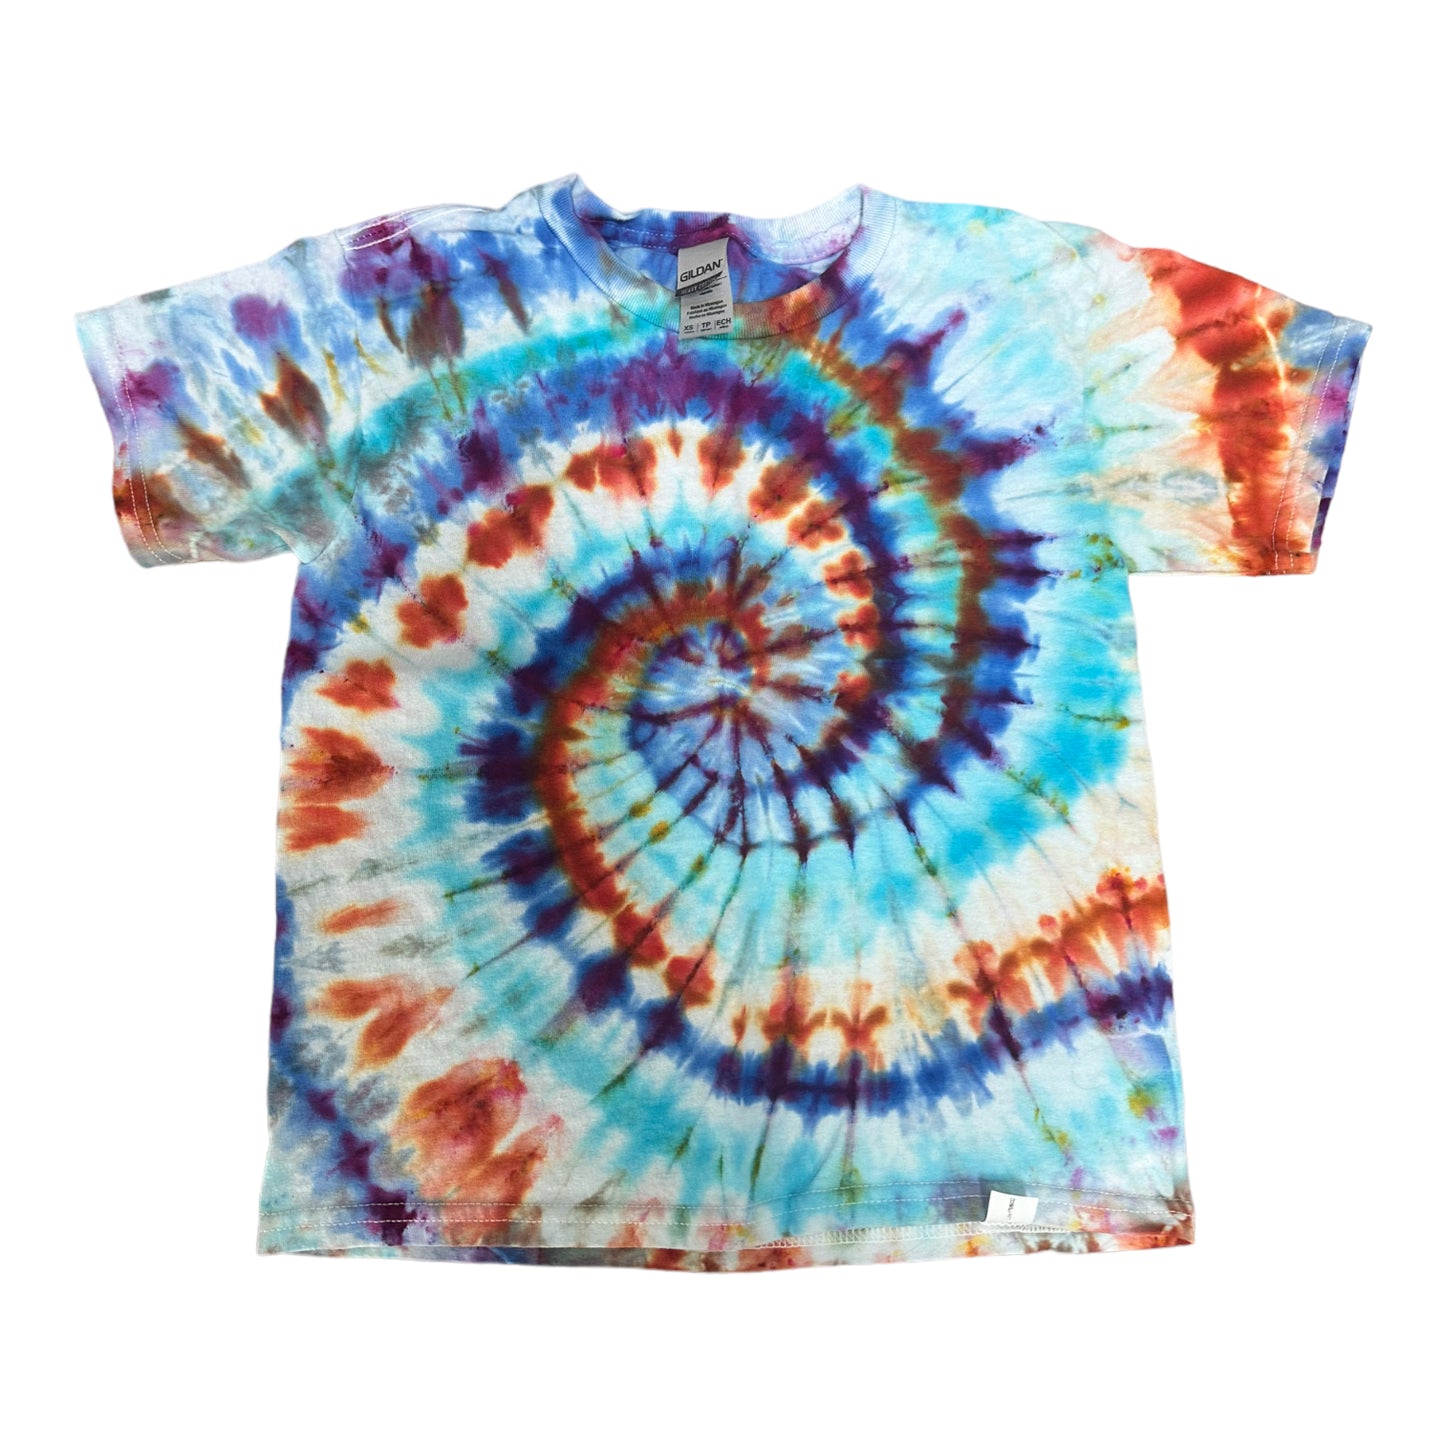 Youth XS Red Purple and Blue Spiral Ice Dye Tie Dye T-Shirt